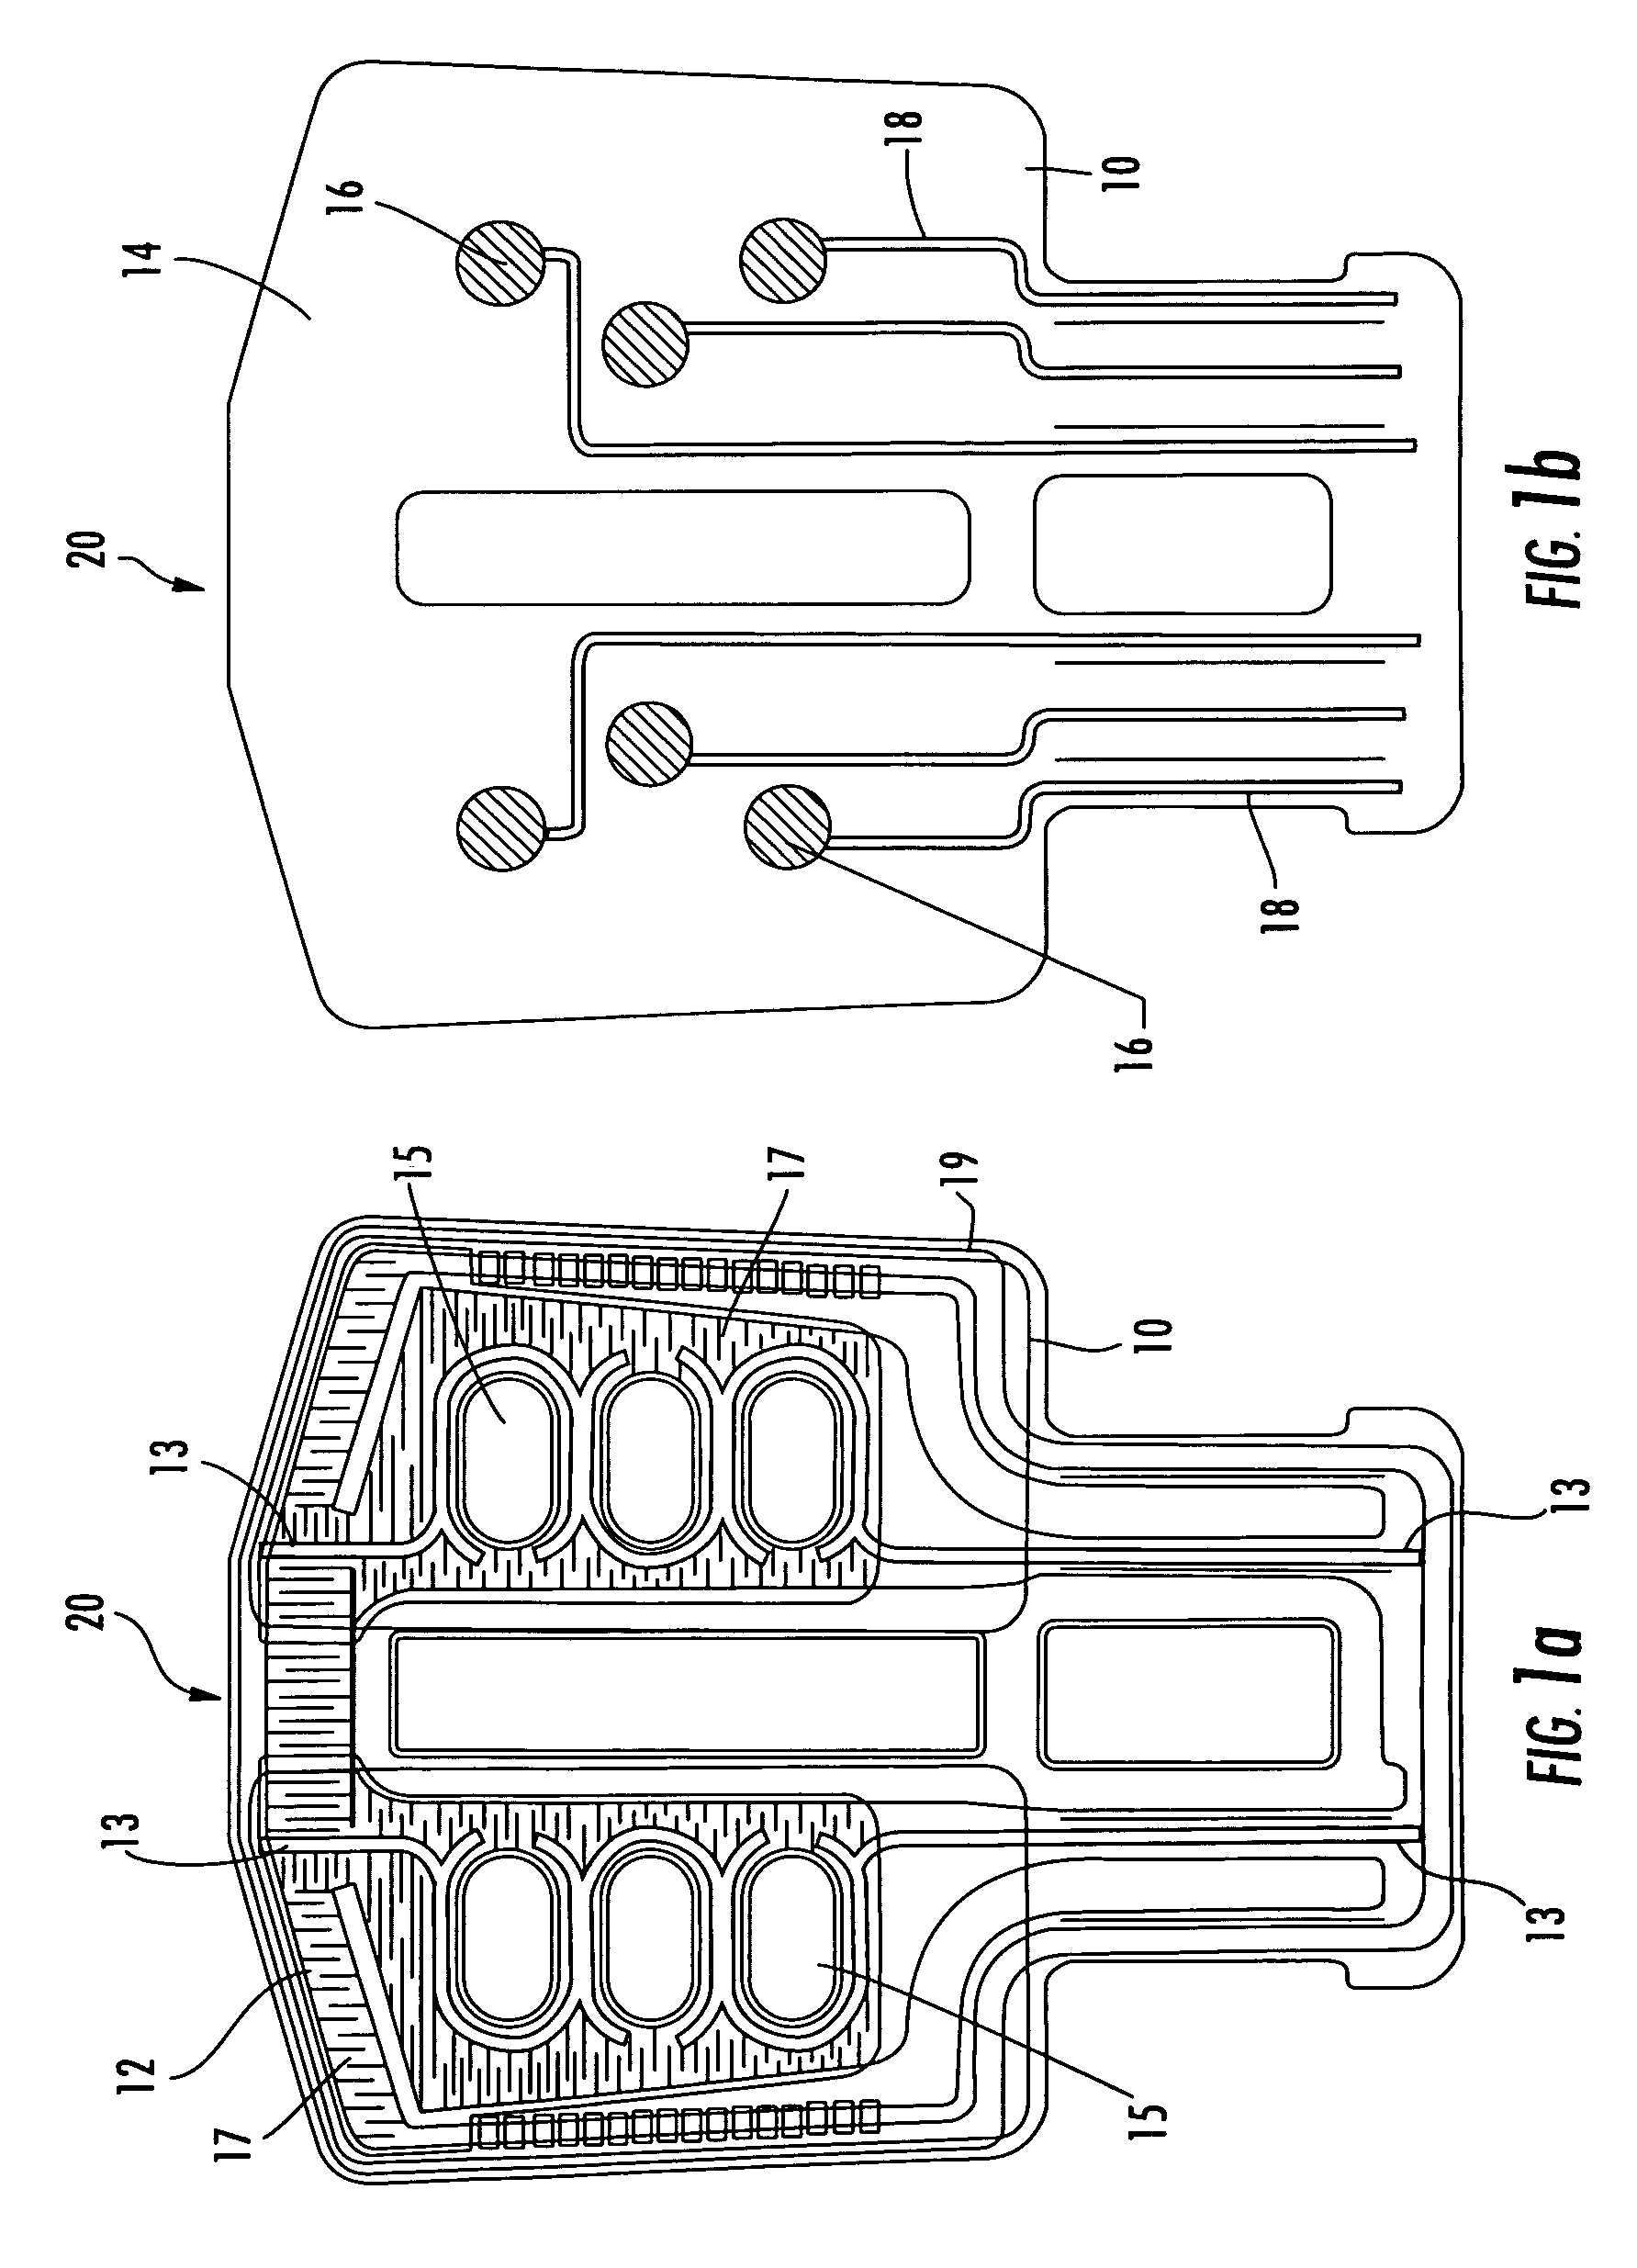 Seat heater with occupant sensor